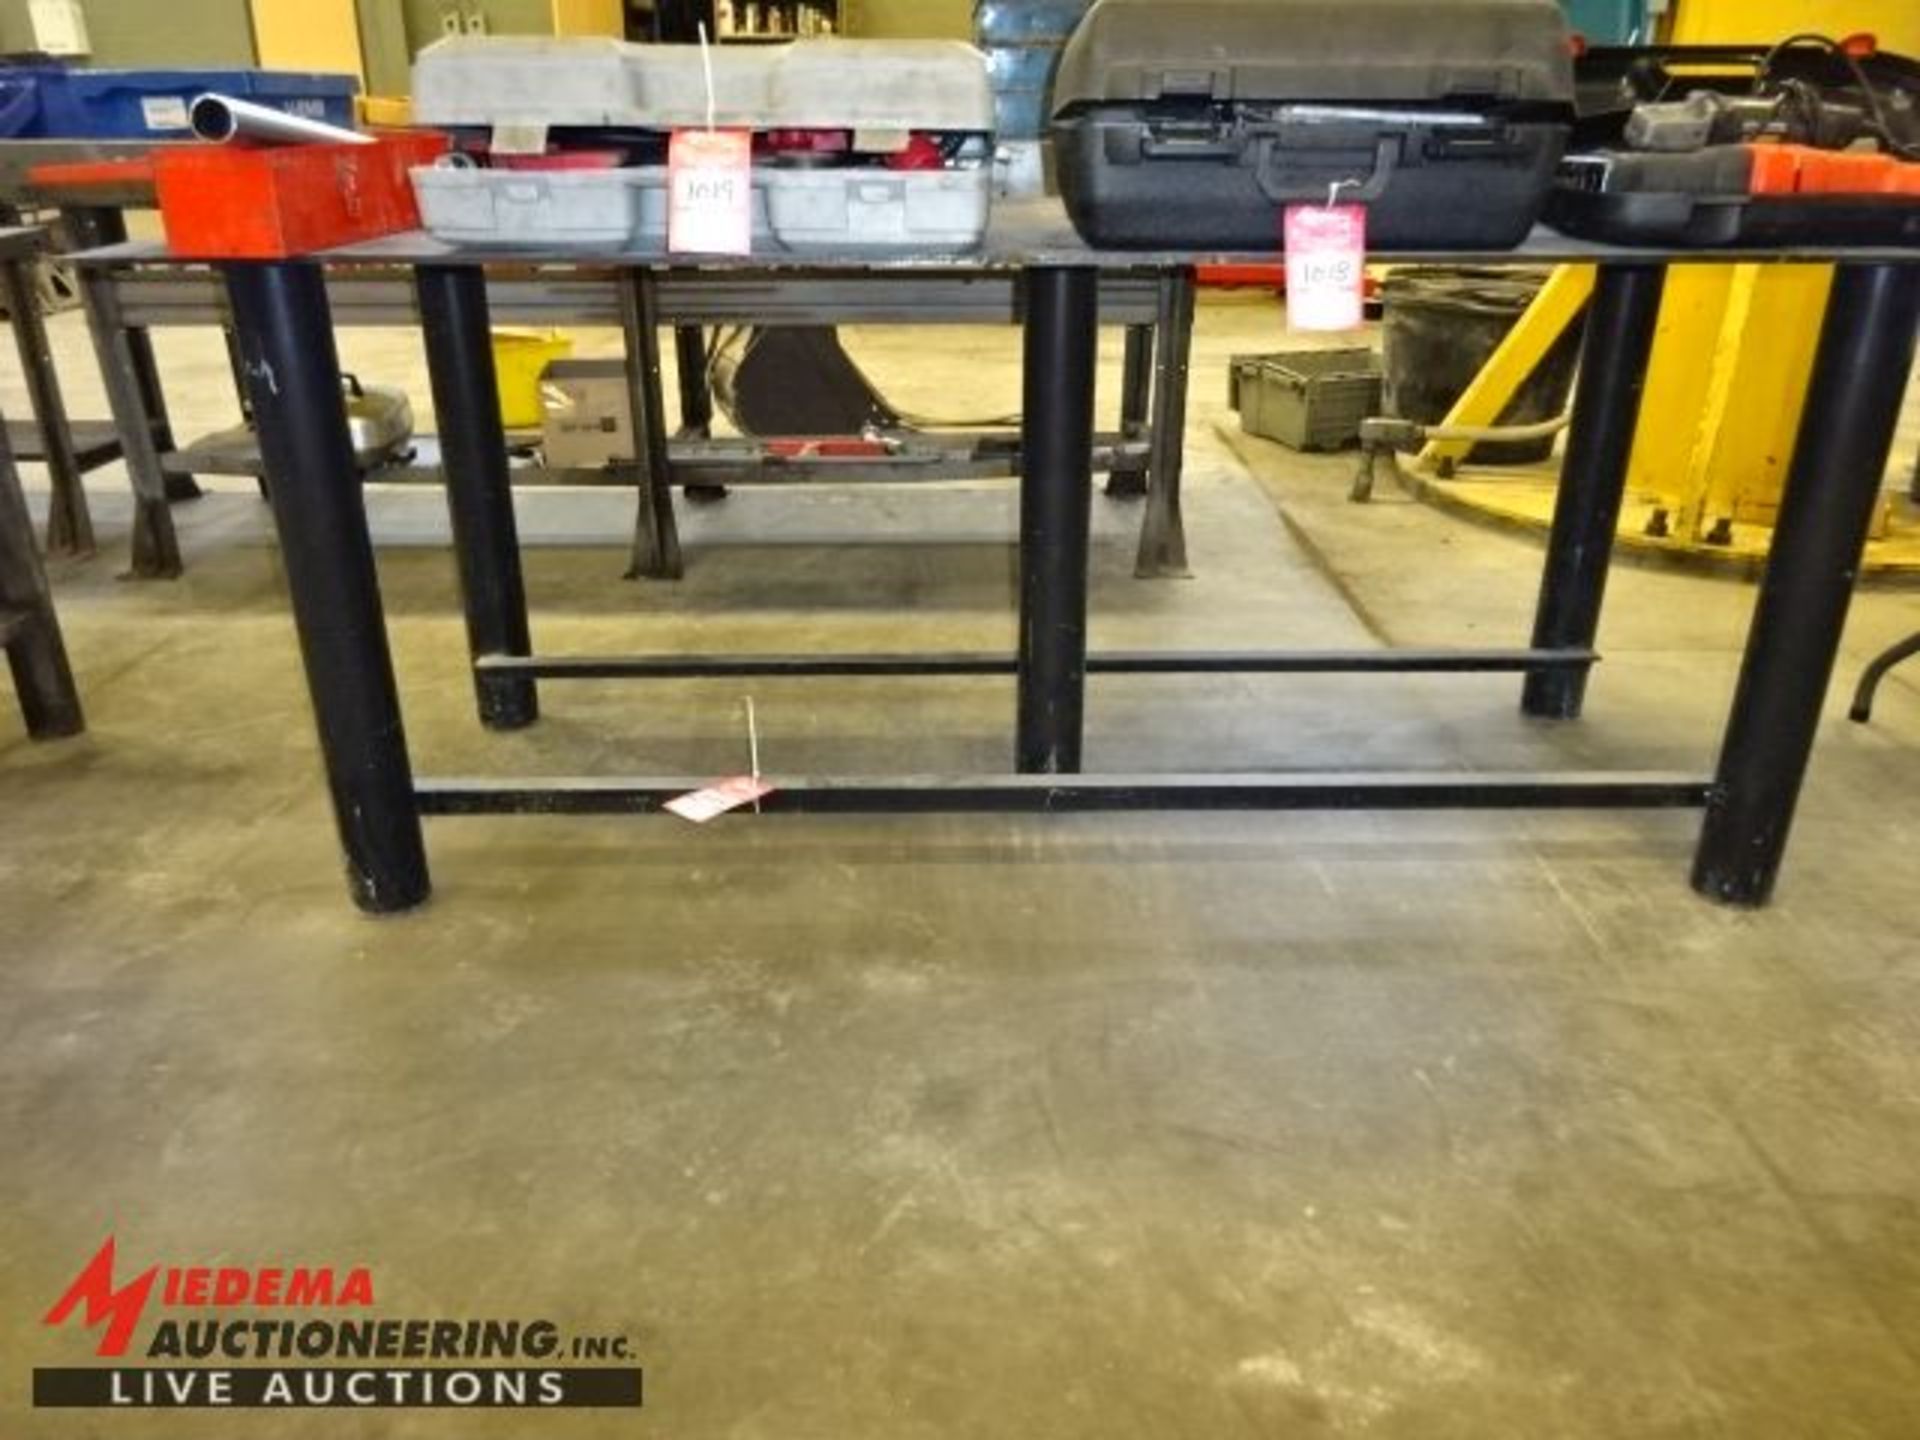 (1)HEAVY DUTY WELDING TABLE, APPROX 7' LONG, 36'' DEEP, 33 1/2'' TALL AND (1) STEEL WORK TABLE 6'